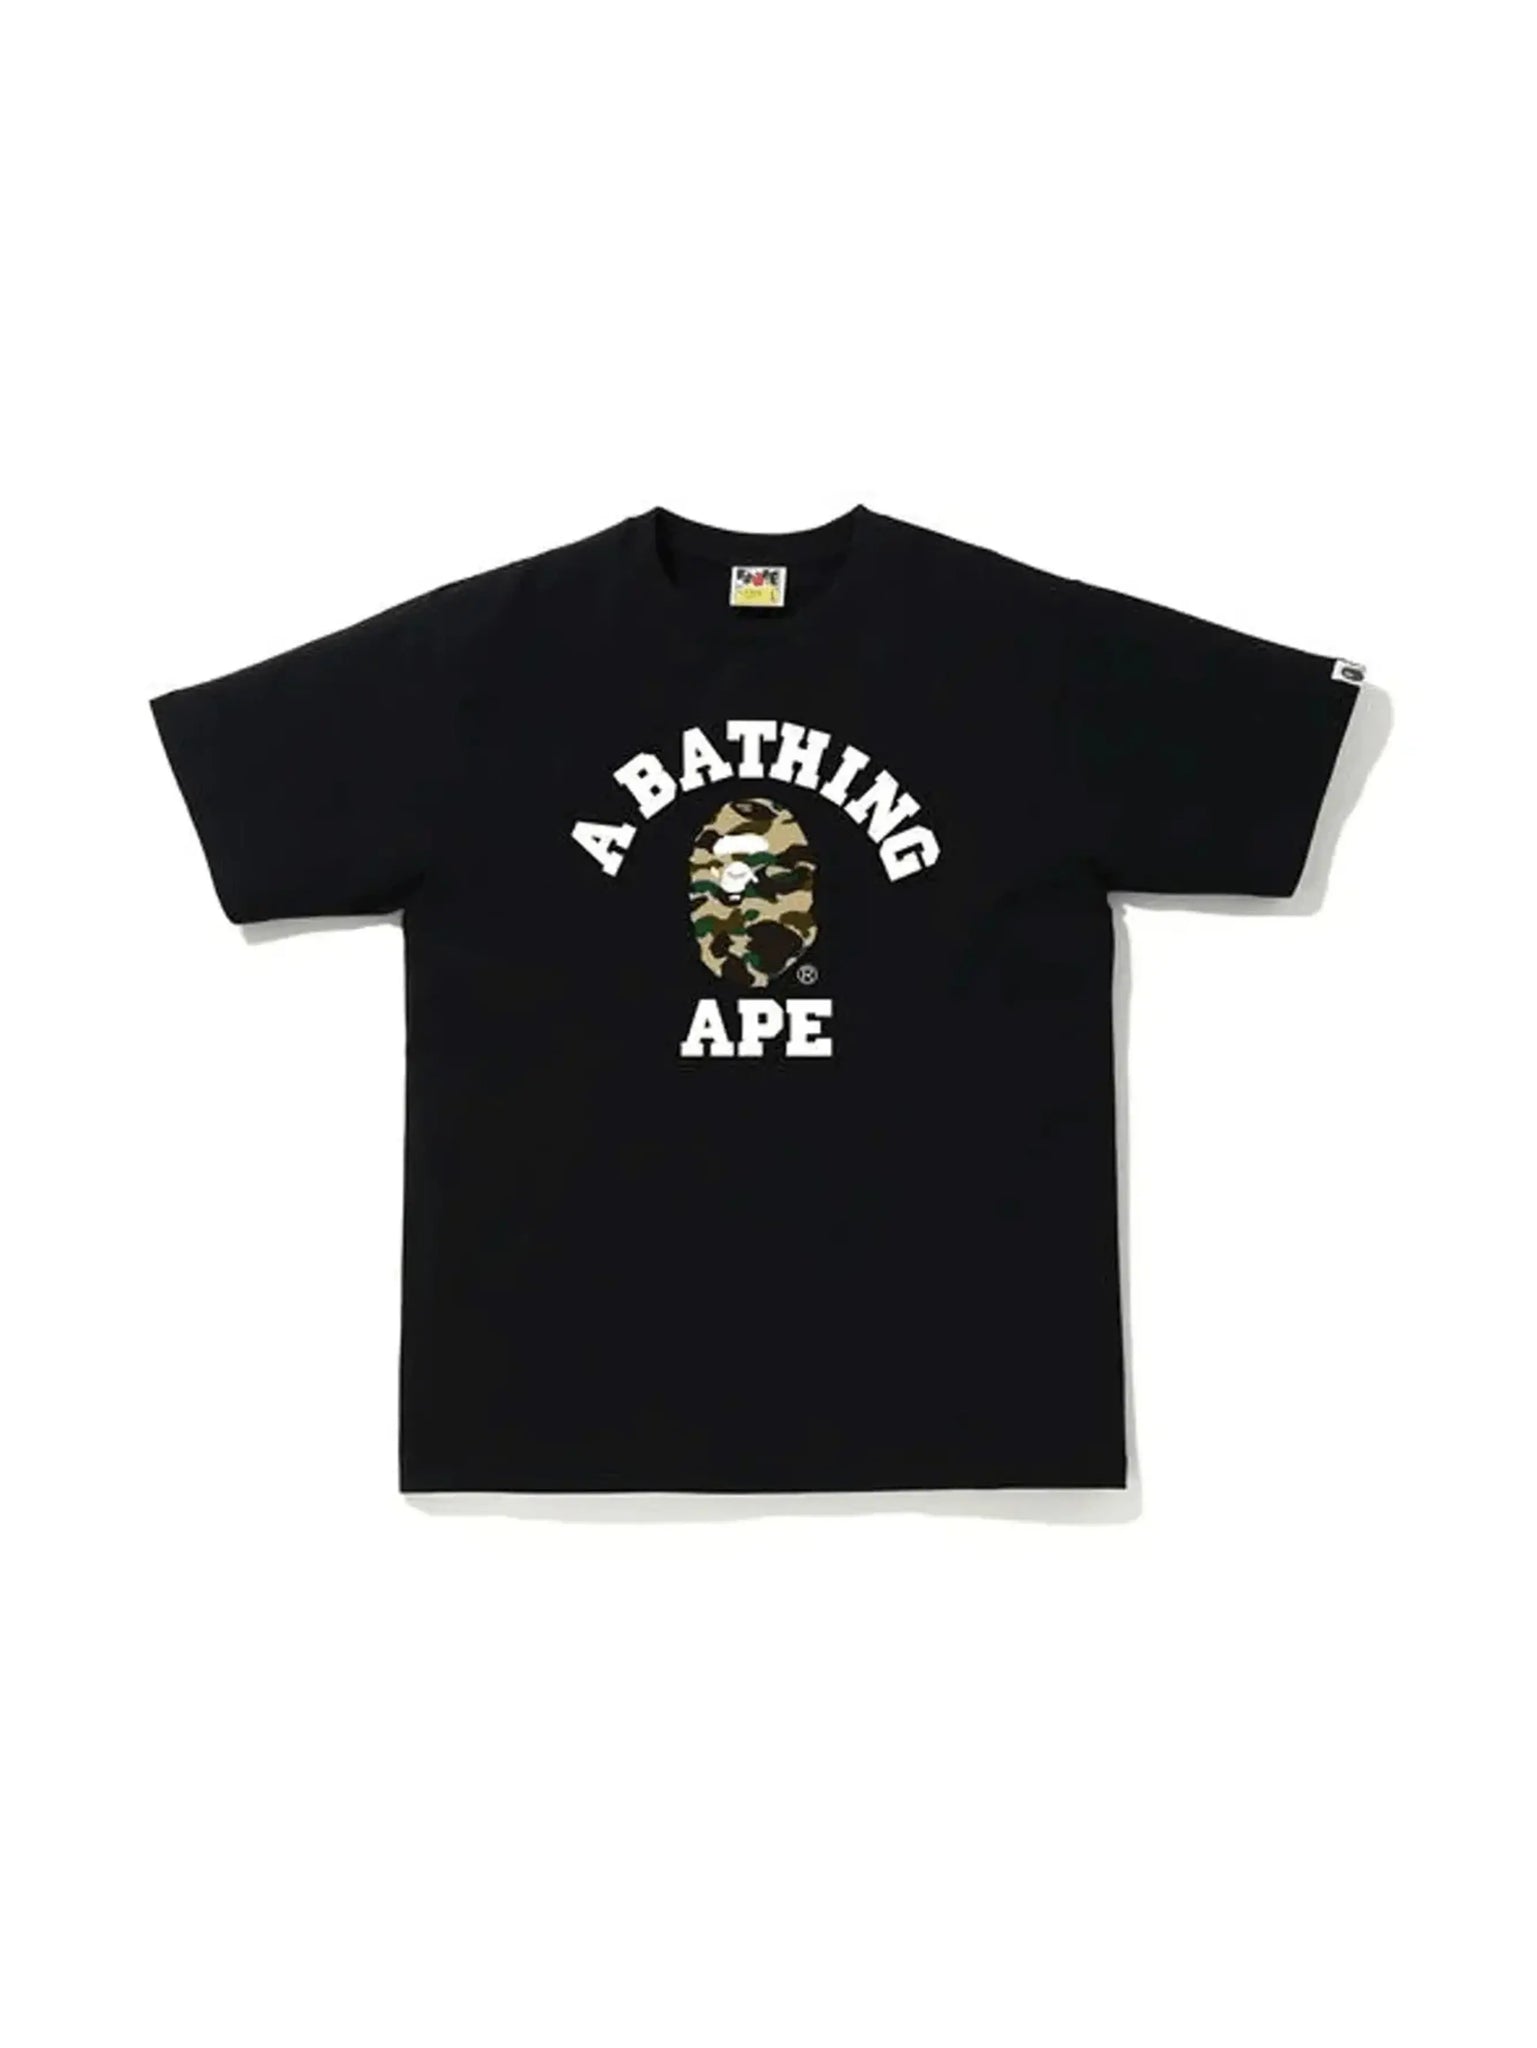 BAPE 1st Camo College T-Shirt Black/Yellow in Auckland, New Zealand - Shop name